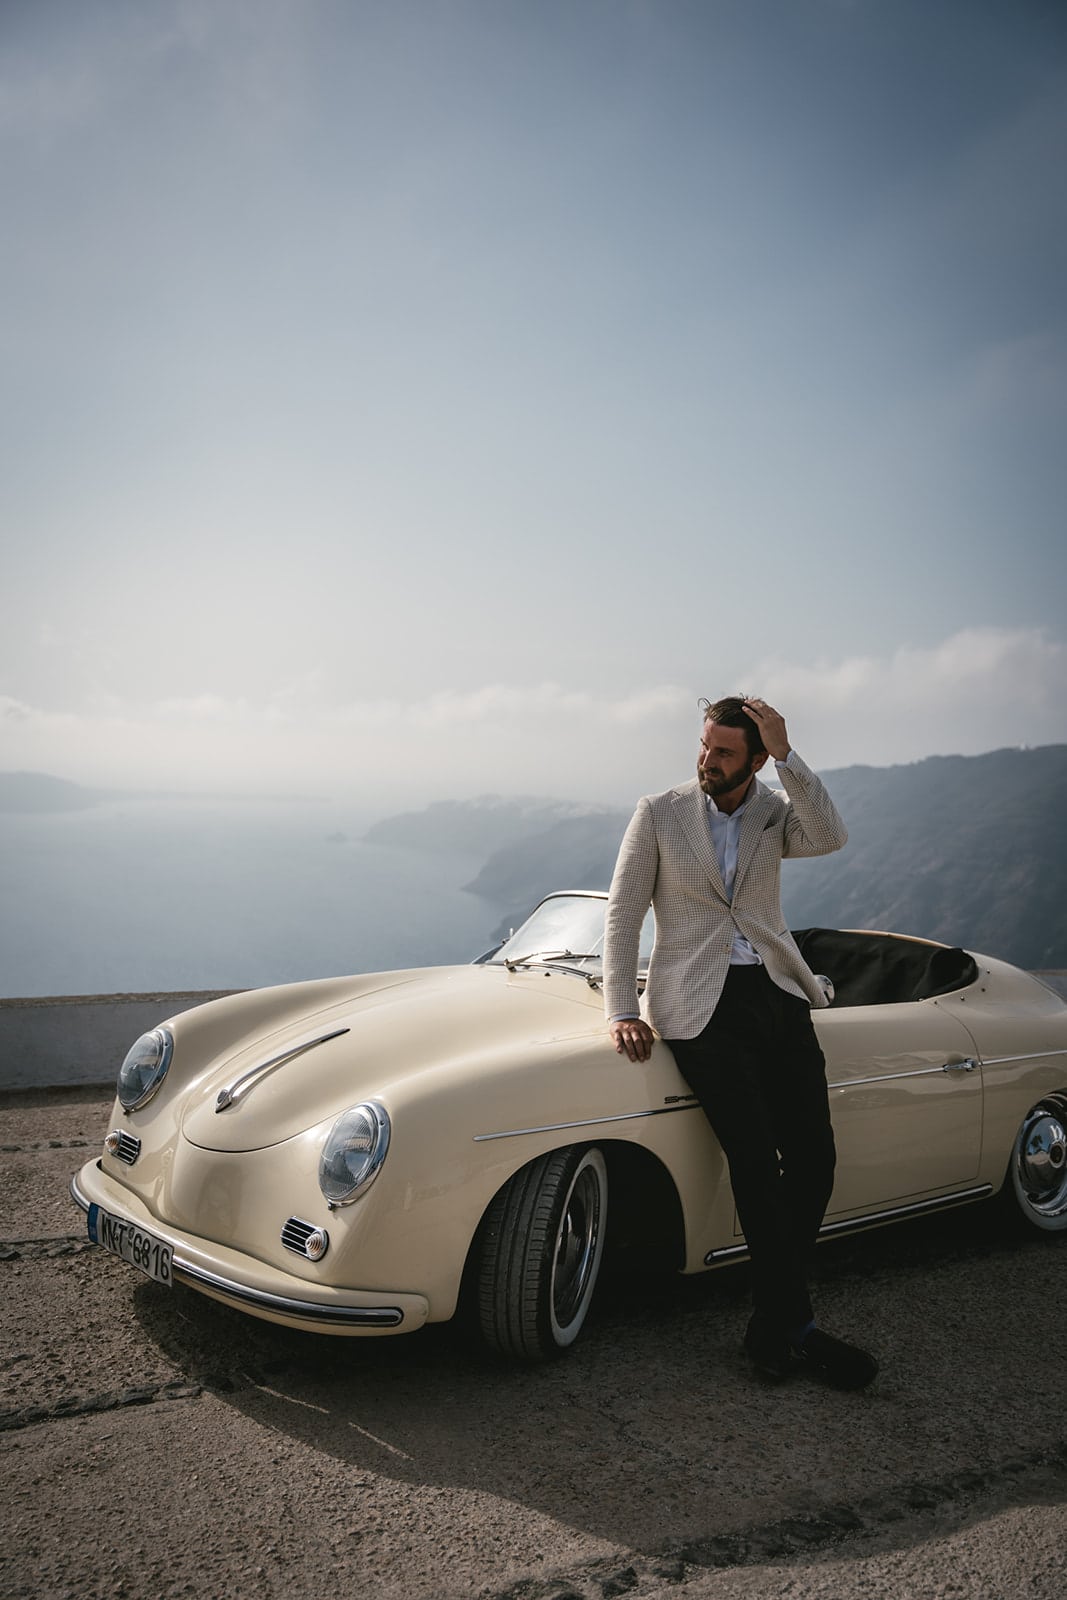 A kiss, the sea, and a vintage car - the perfect trilogy for an elopement on Santorini